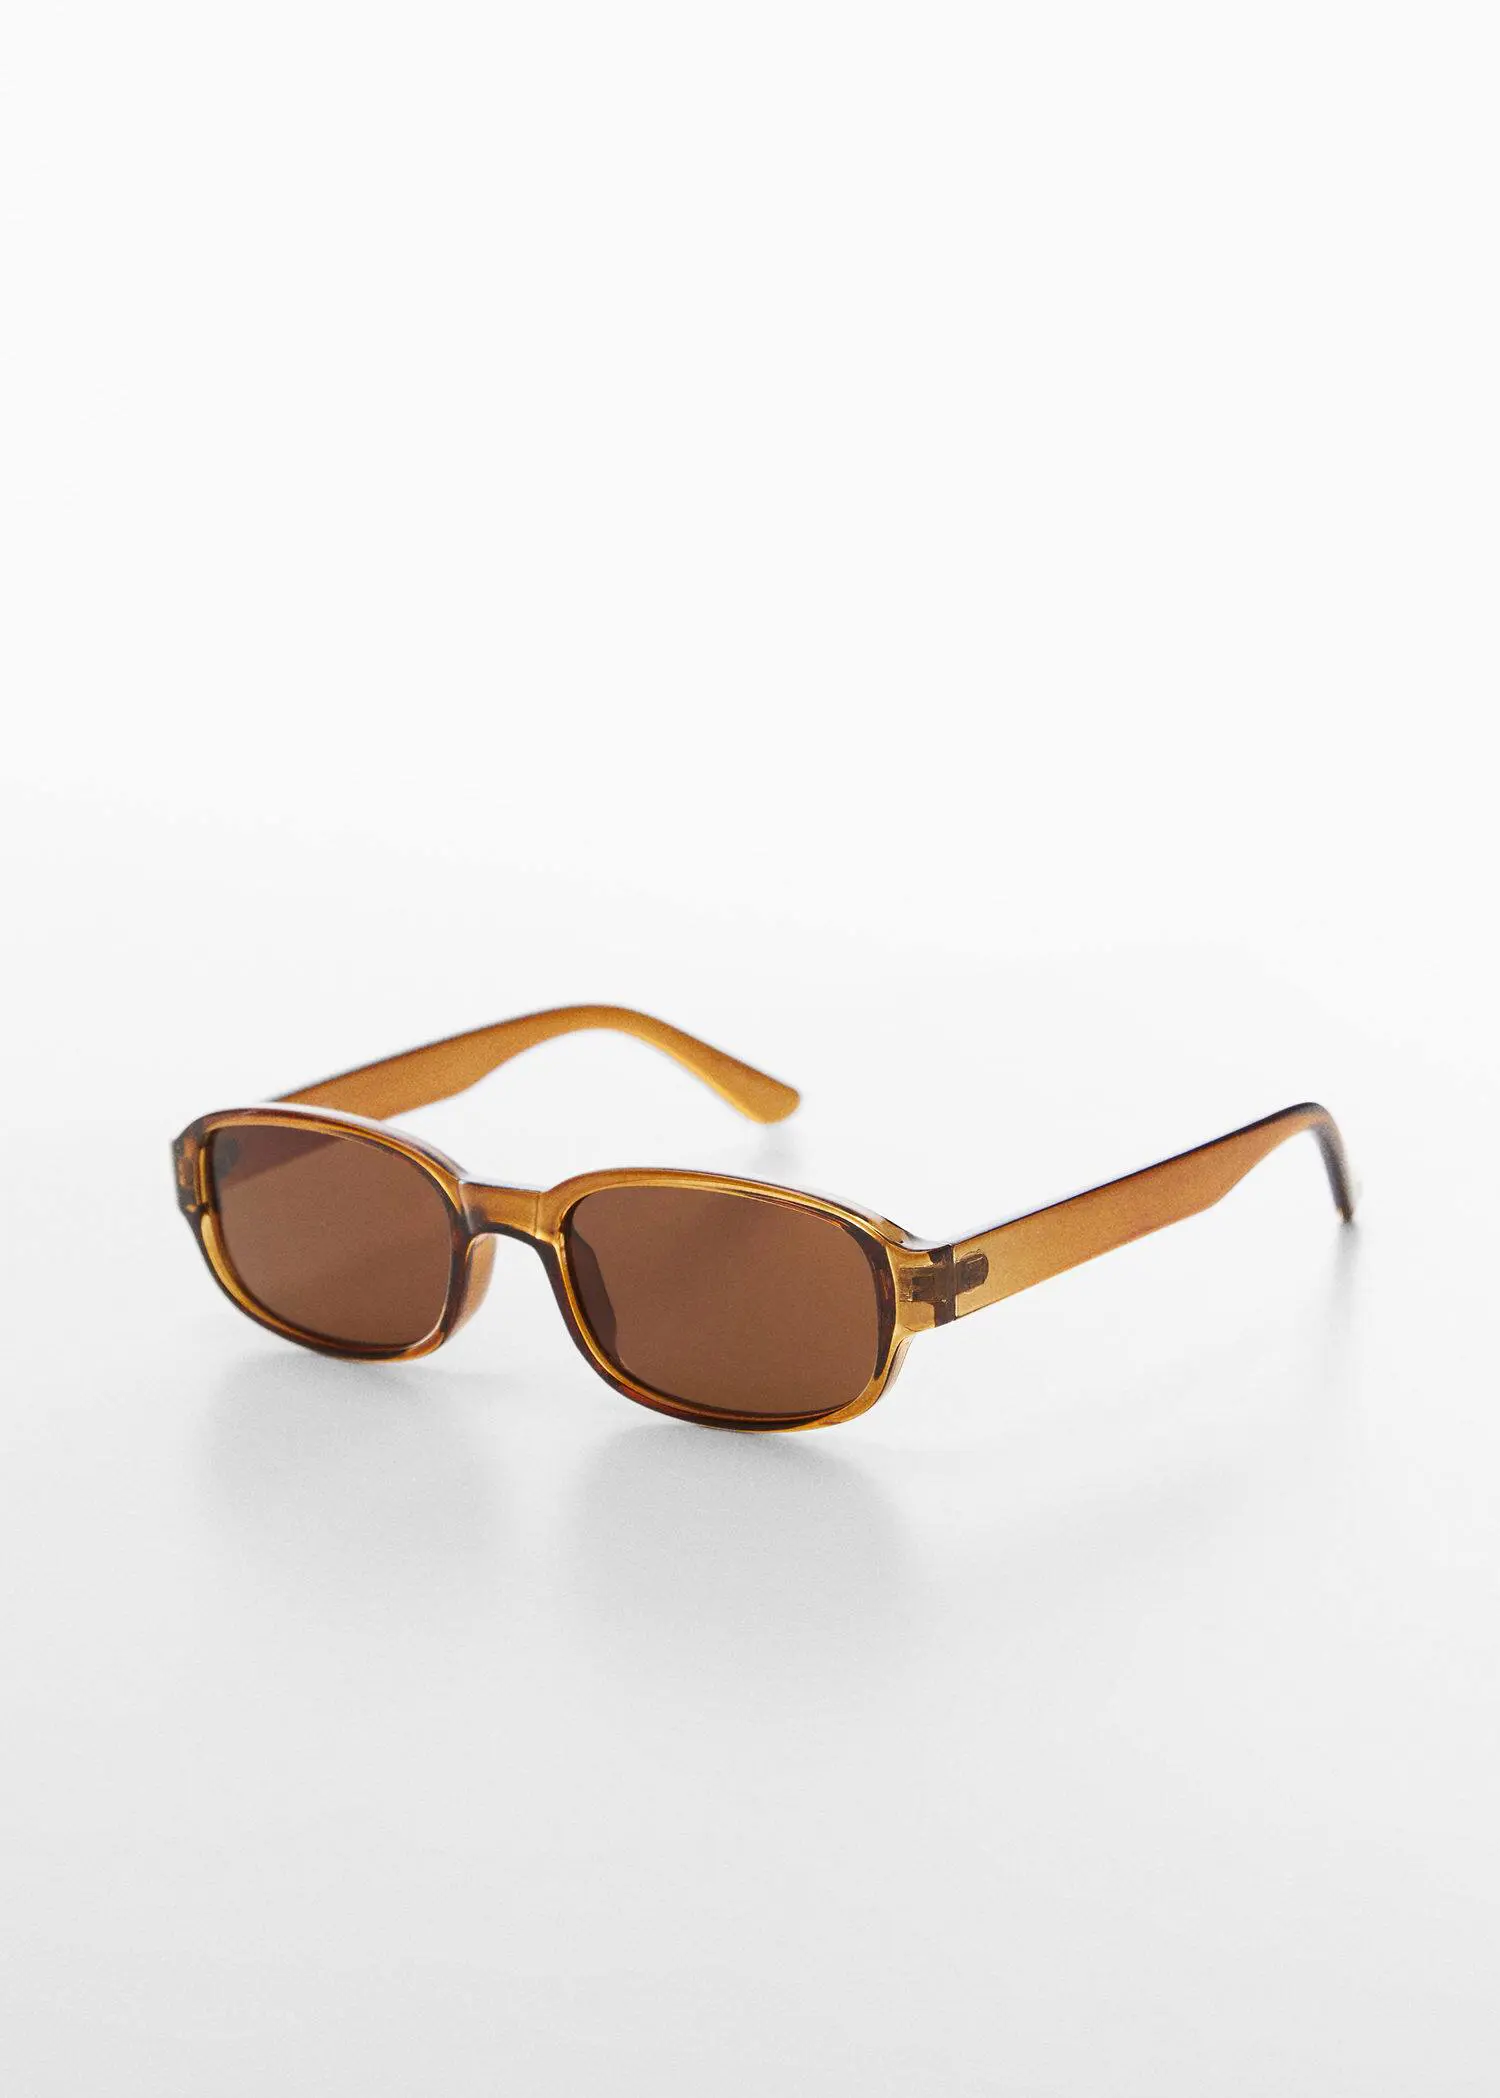 Mango Retro style sunglasses. a pair of brown sunglasses sitting on top of a table. 